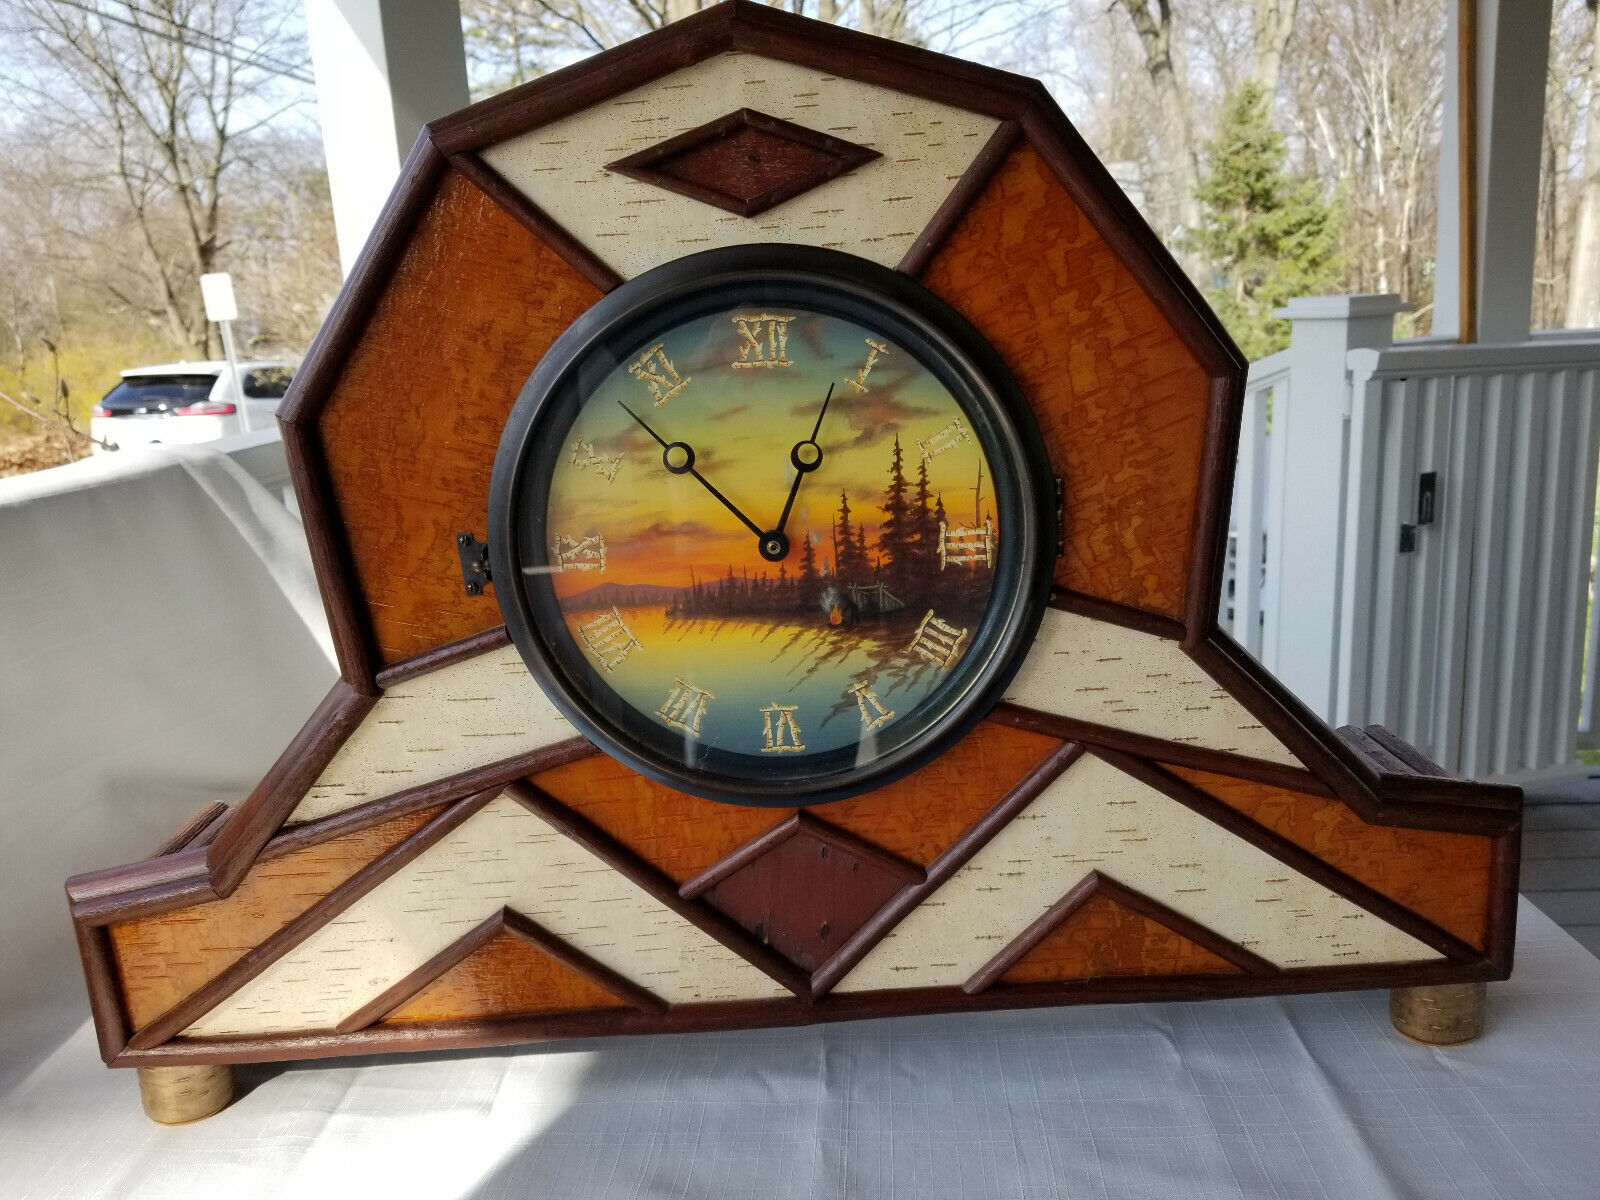 Adirondack Twig and Bark Mantel Clock by Jerry and Jessica Farrell - Handcrafted